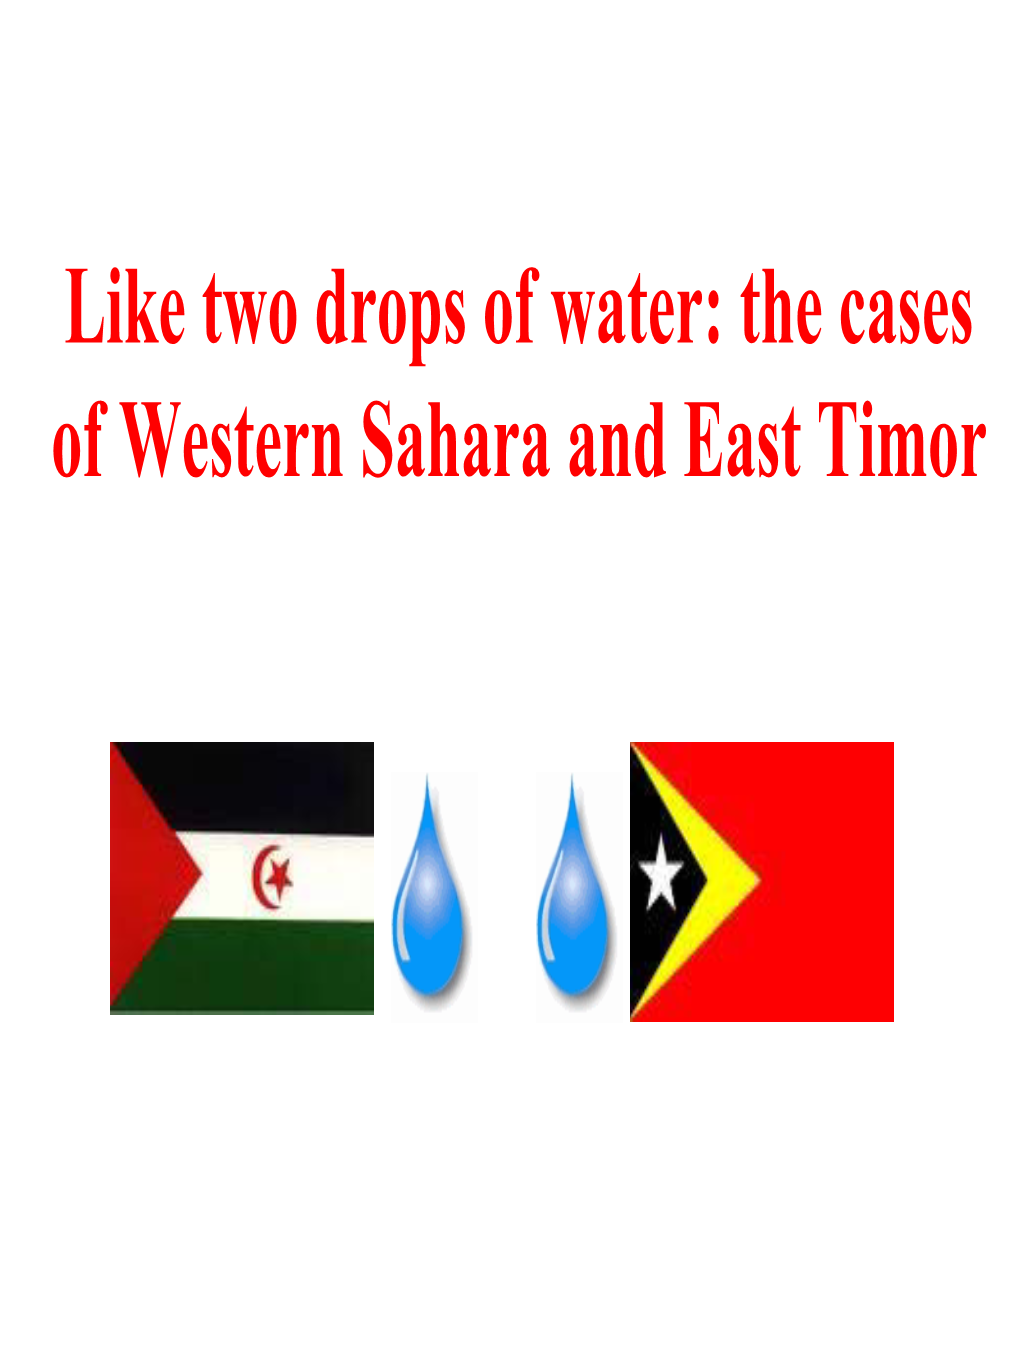 The Cases of Western Sahara and East Timor 1999